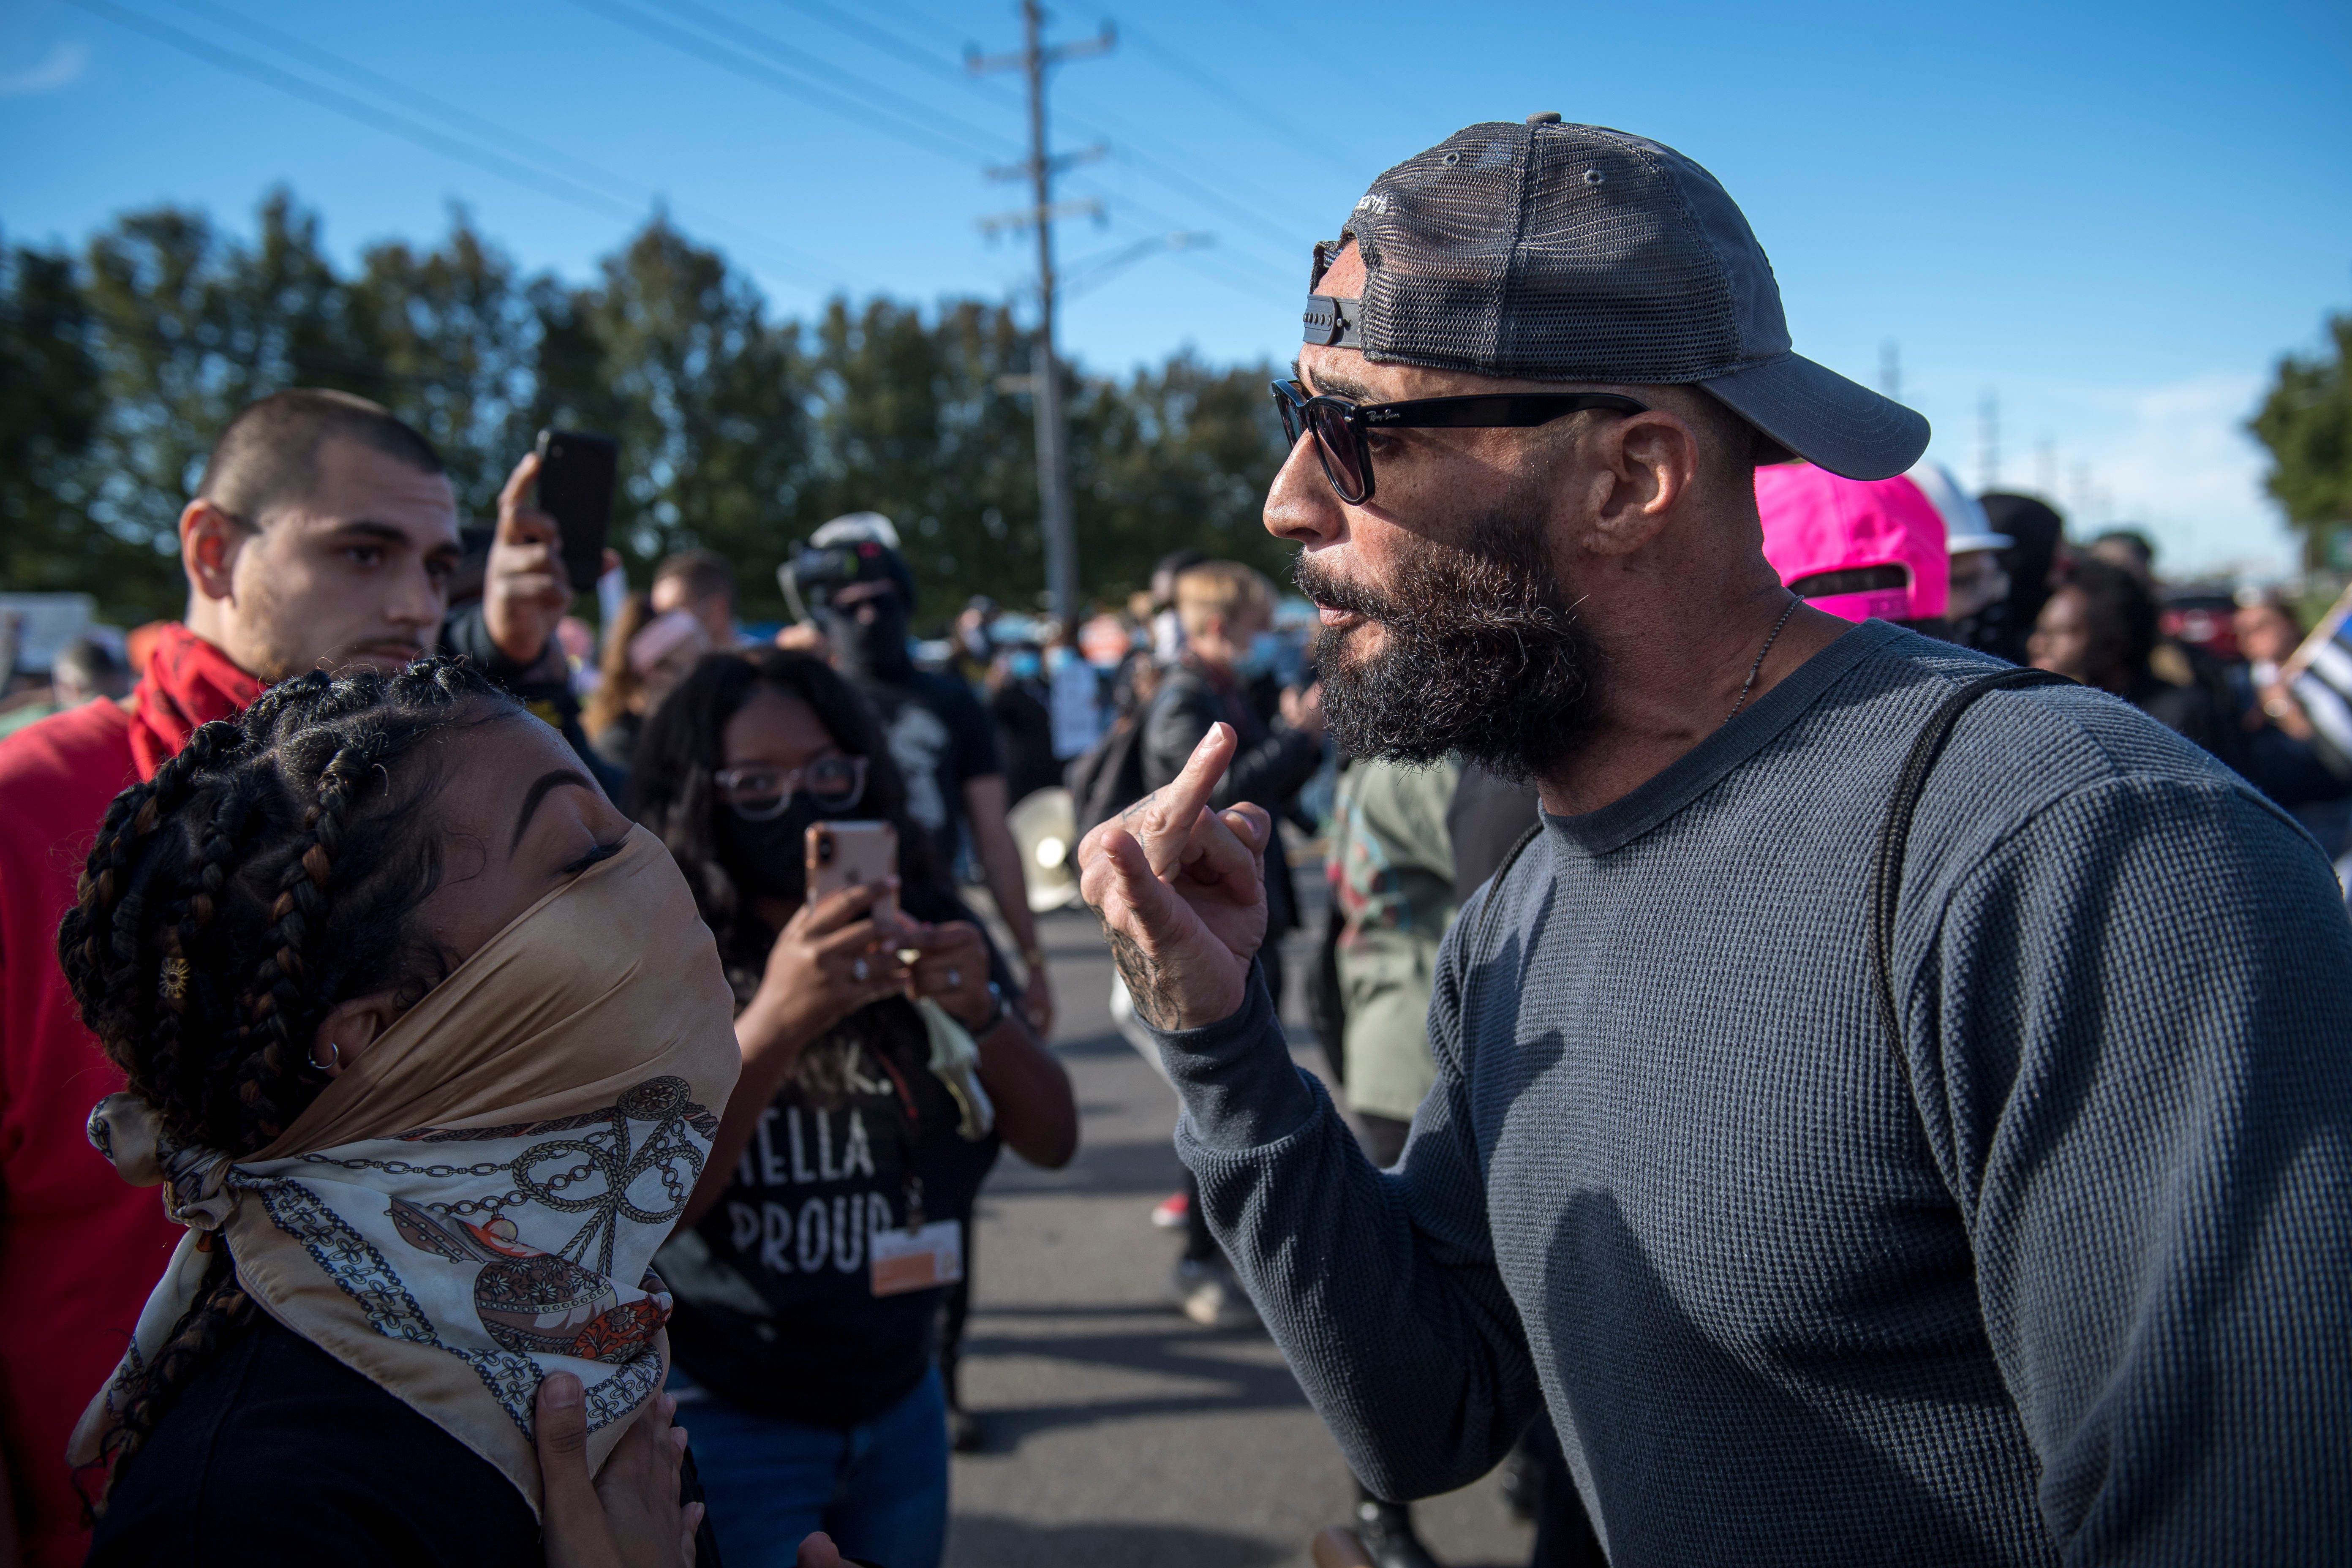 A Detroit Will Breathe protester argues with a Trump supporter before the March Against Racism in Warren on Sept. 19, 2020. The march in Warren occurred in response to the city called hate crimes against residents Candace Hall, her husband Eddie and their two children.